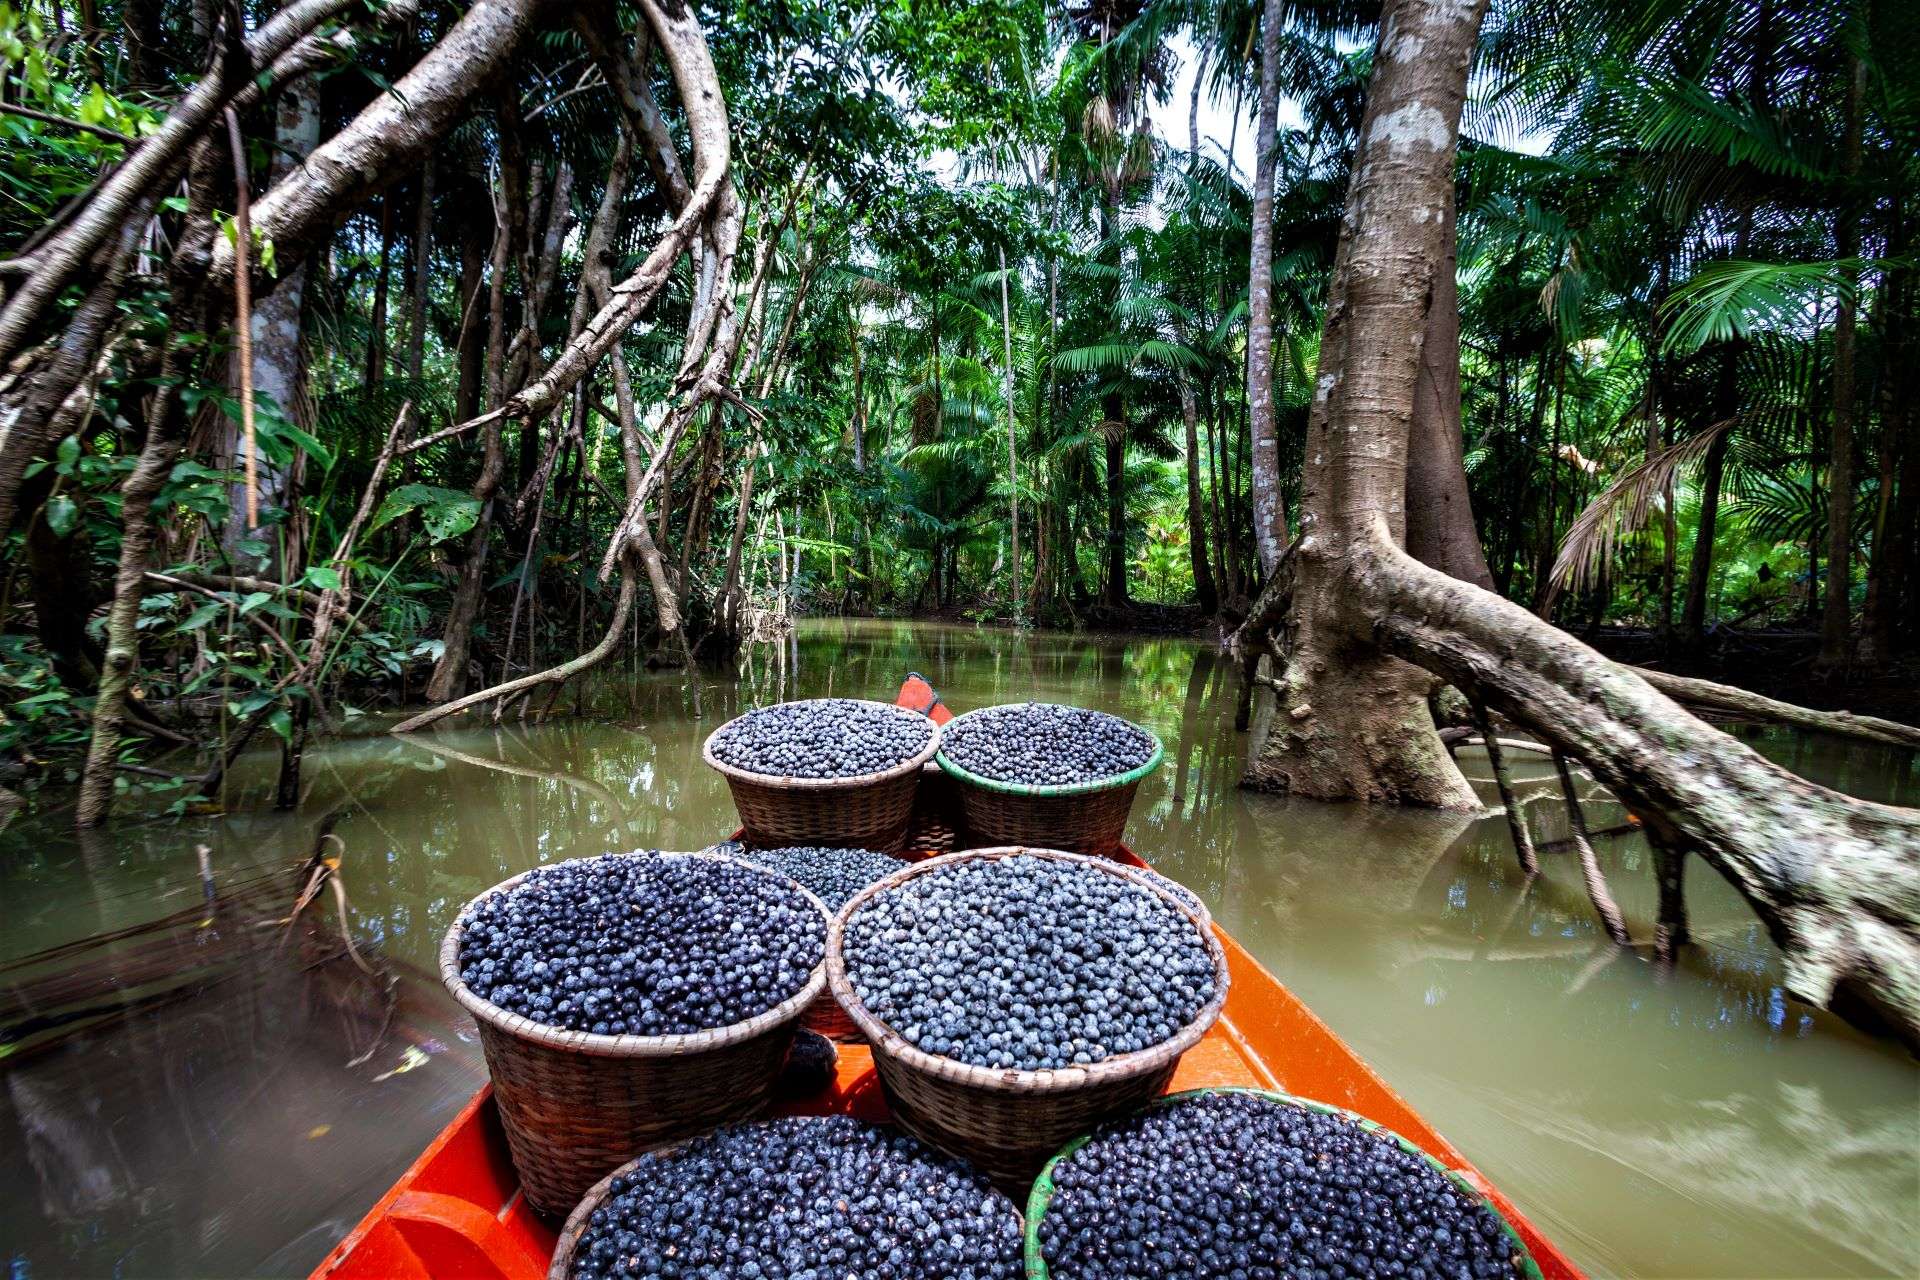 Fresh acai berries fruit in straw baskets in red boat and forest trees in the Amazon rainforest.